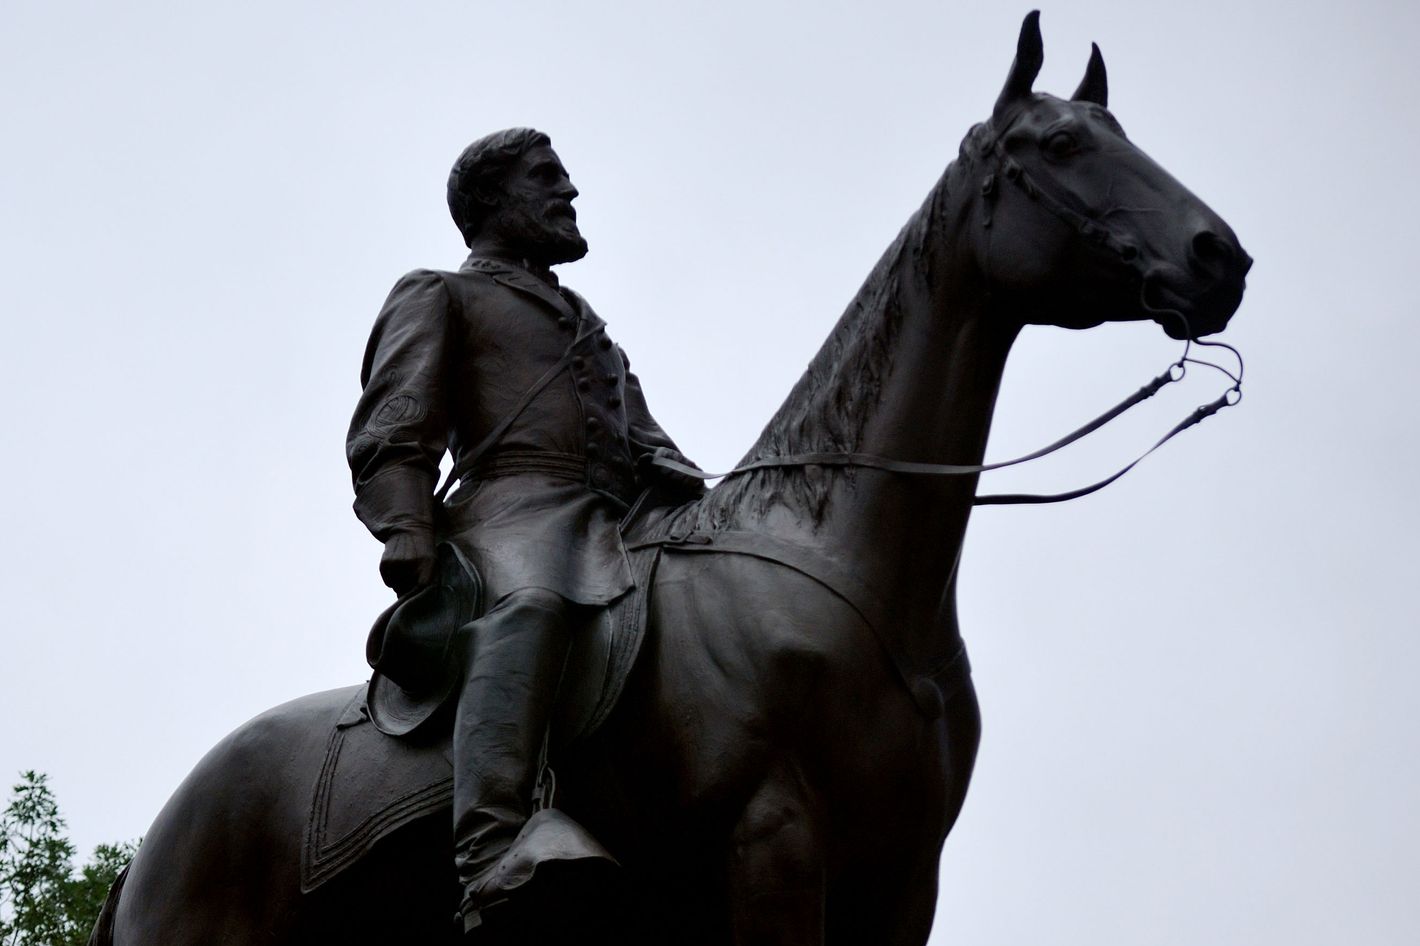 Robert E. Lee Monuments Are Symbols of the Neo-Confederacy